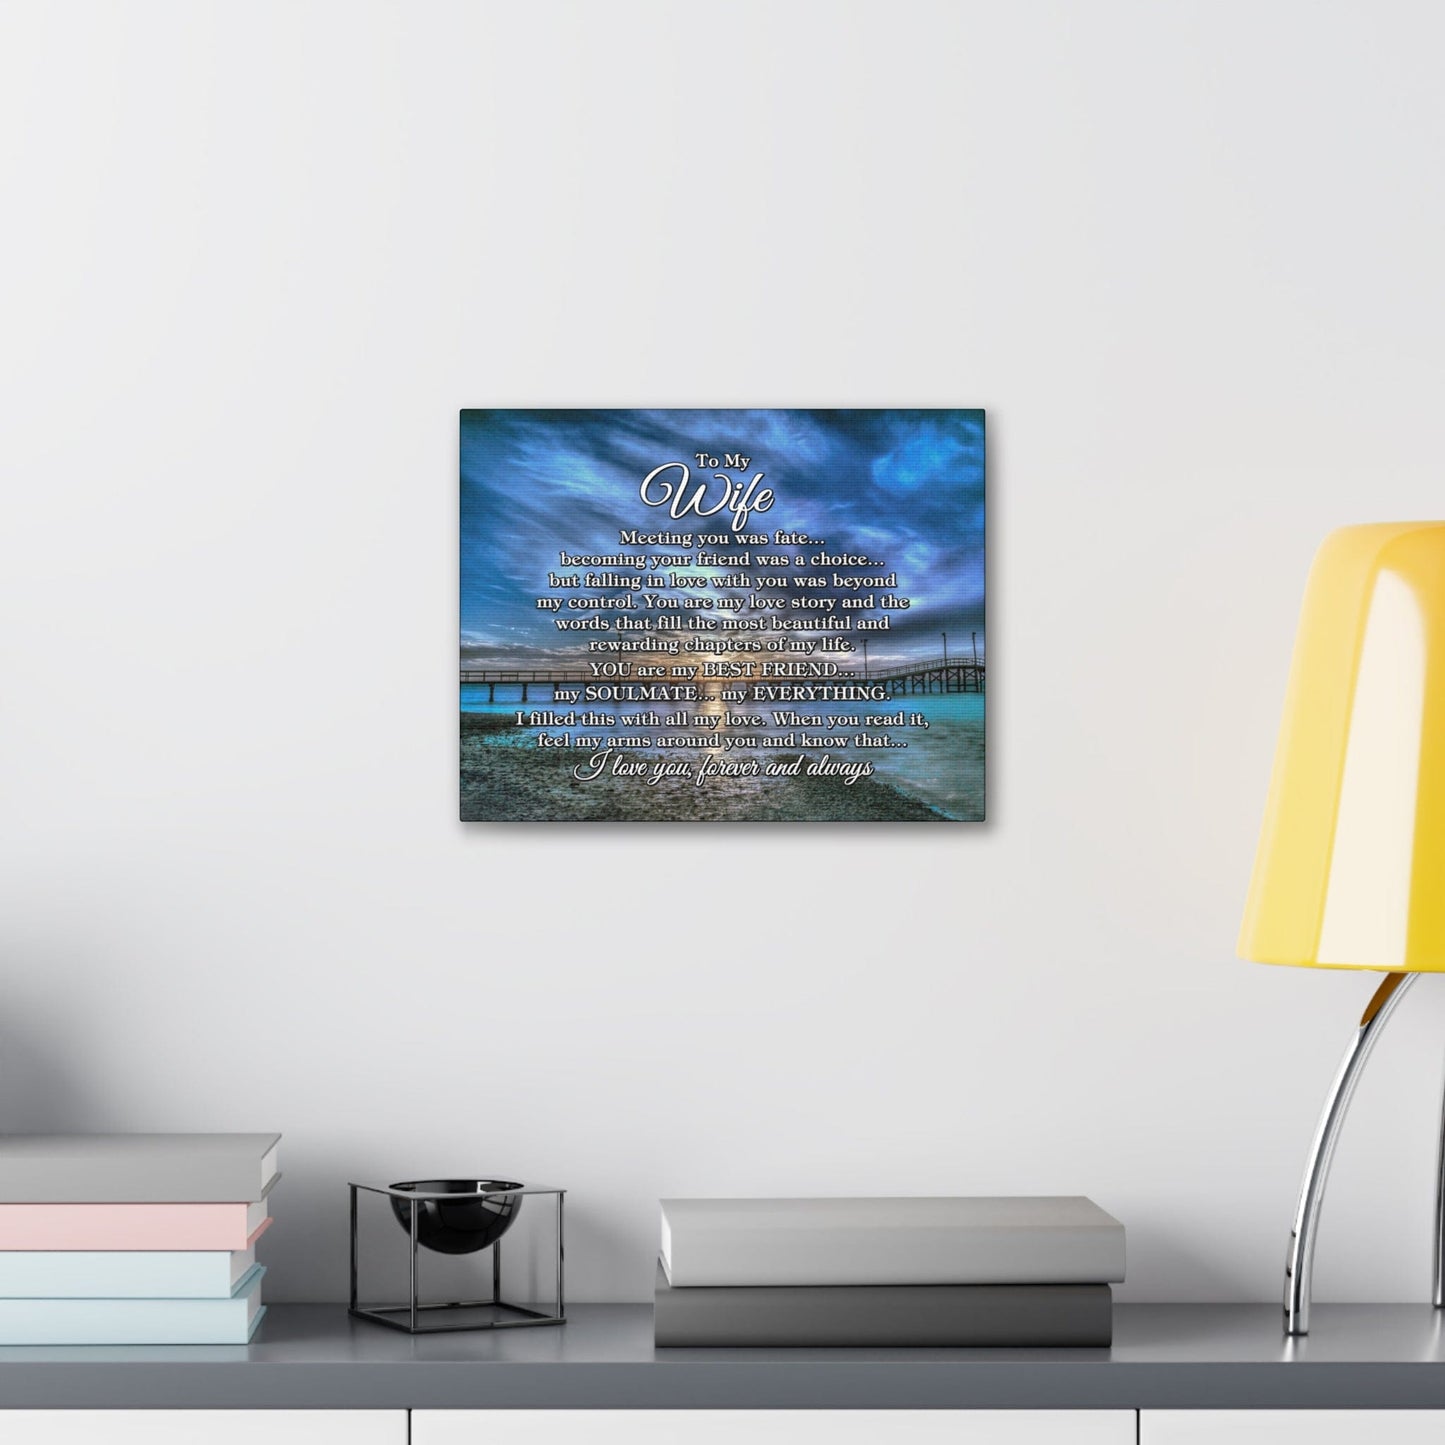 To My Wife "Meeting you was..." Canvas Gallery Wrap (Gulf Pier Blue Sunset)